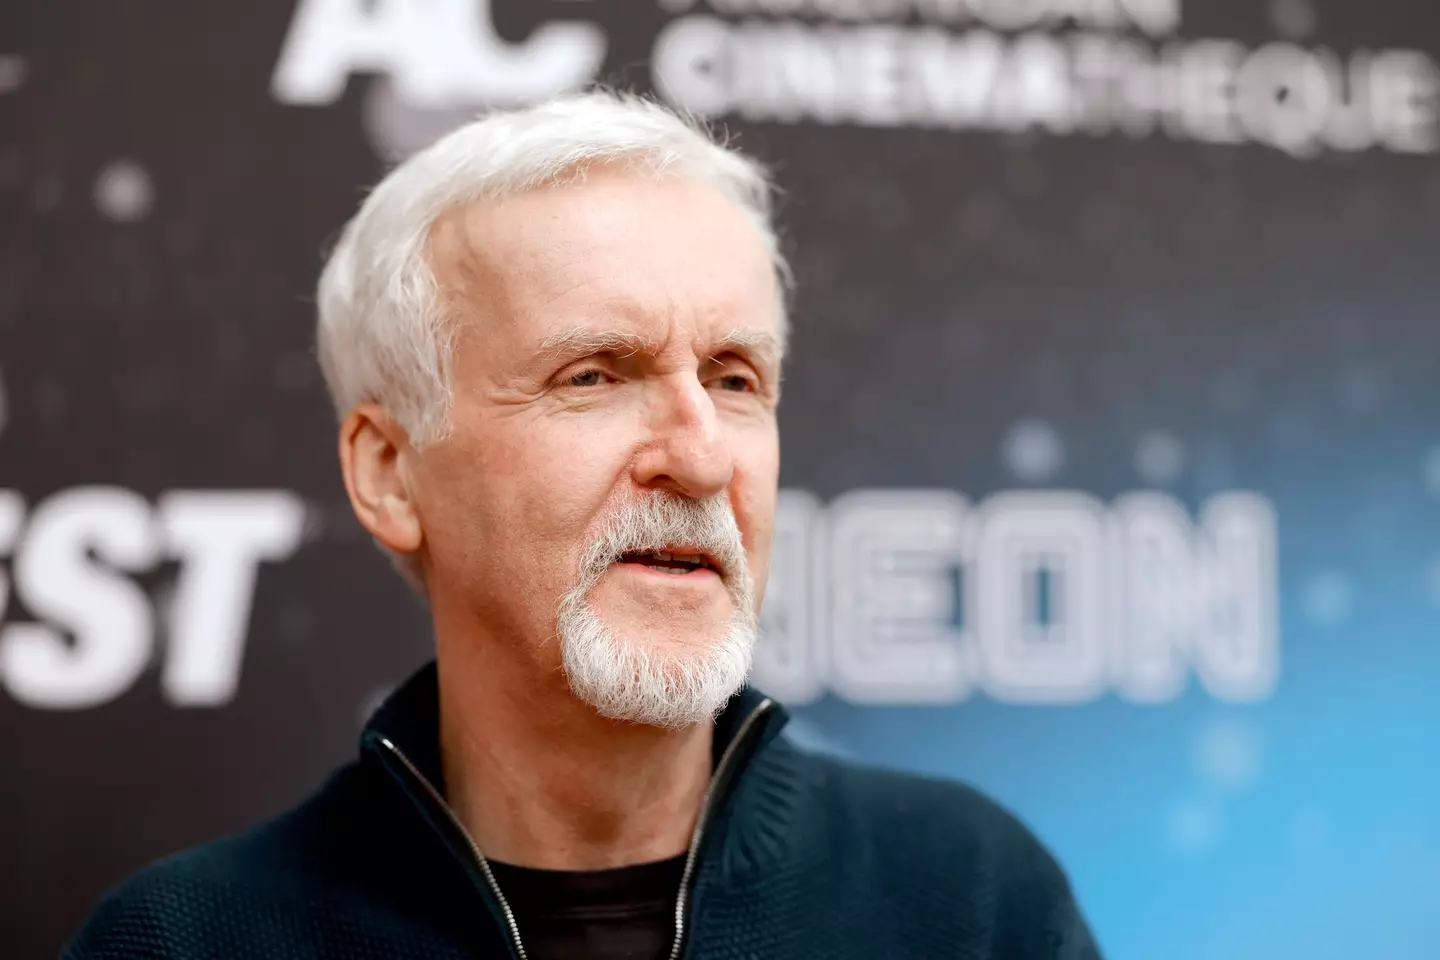 James Cameron was filming for 'The Abyss' when his diving equipment malfunctioned.